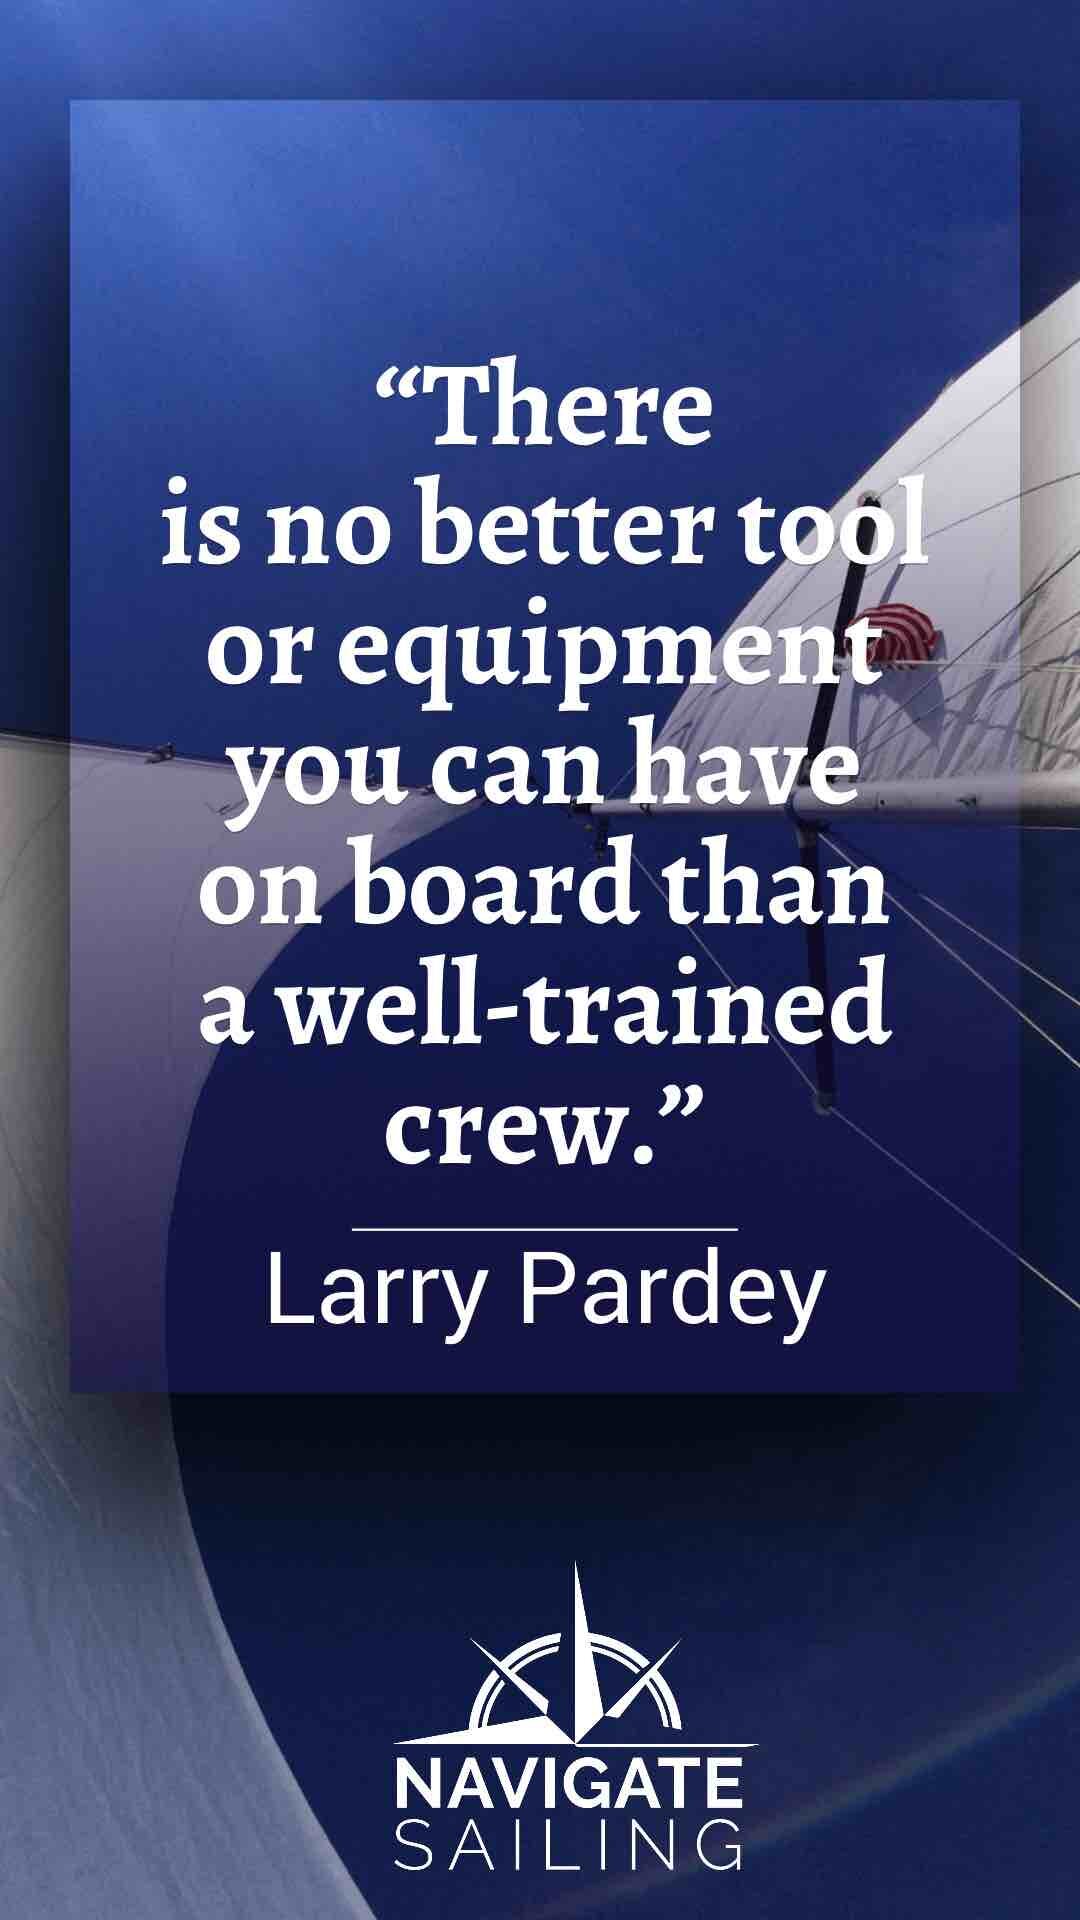 Inspiration from legendary sailor Larry Pardey